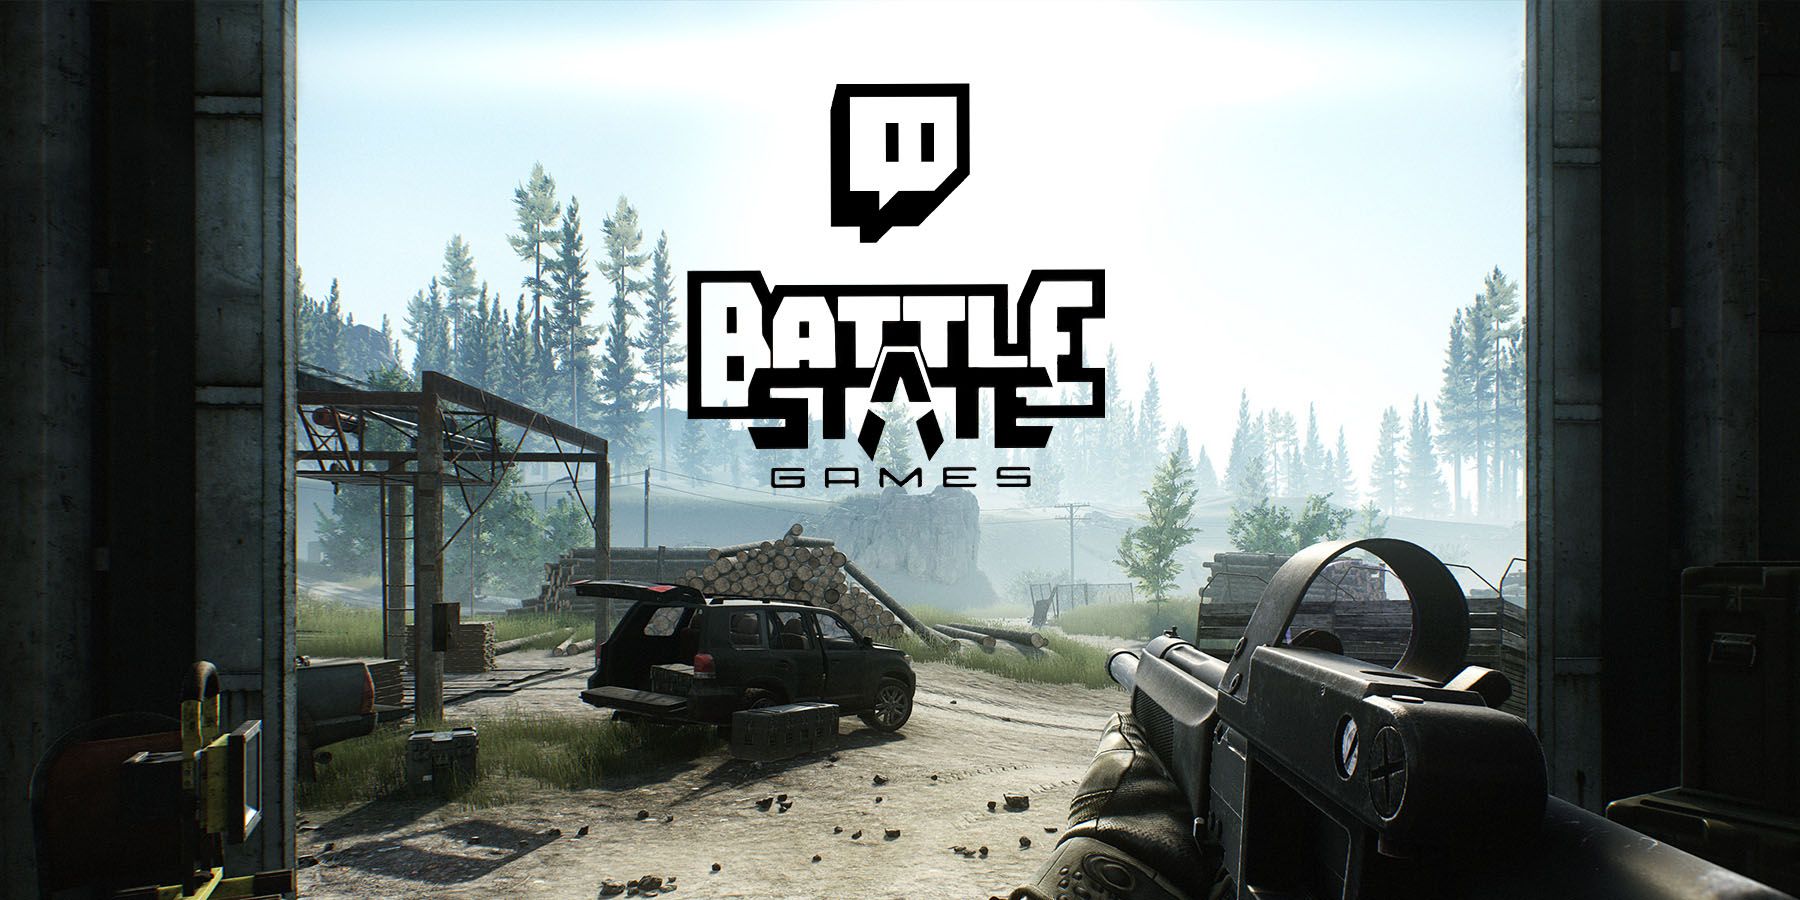 Escape from Tarkov Dev Battlestate Games Has Been Banned from Twitch